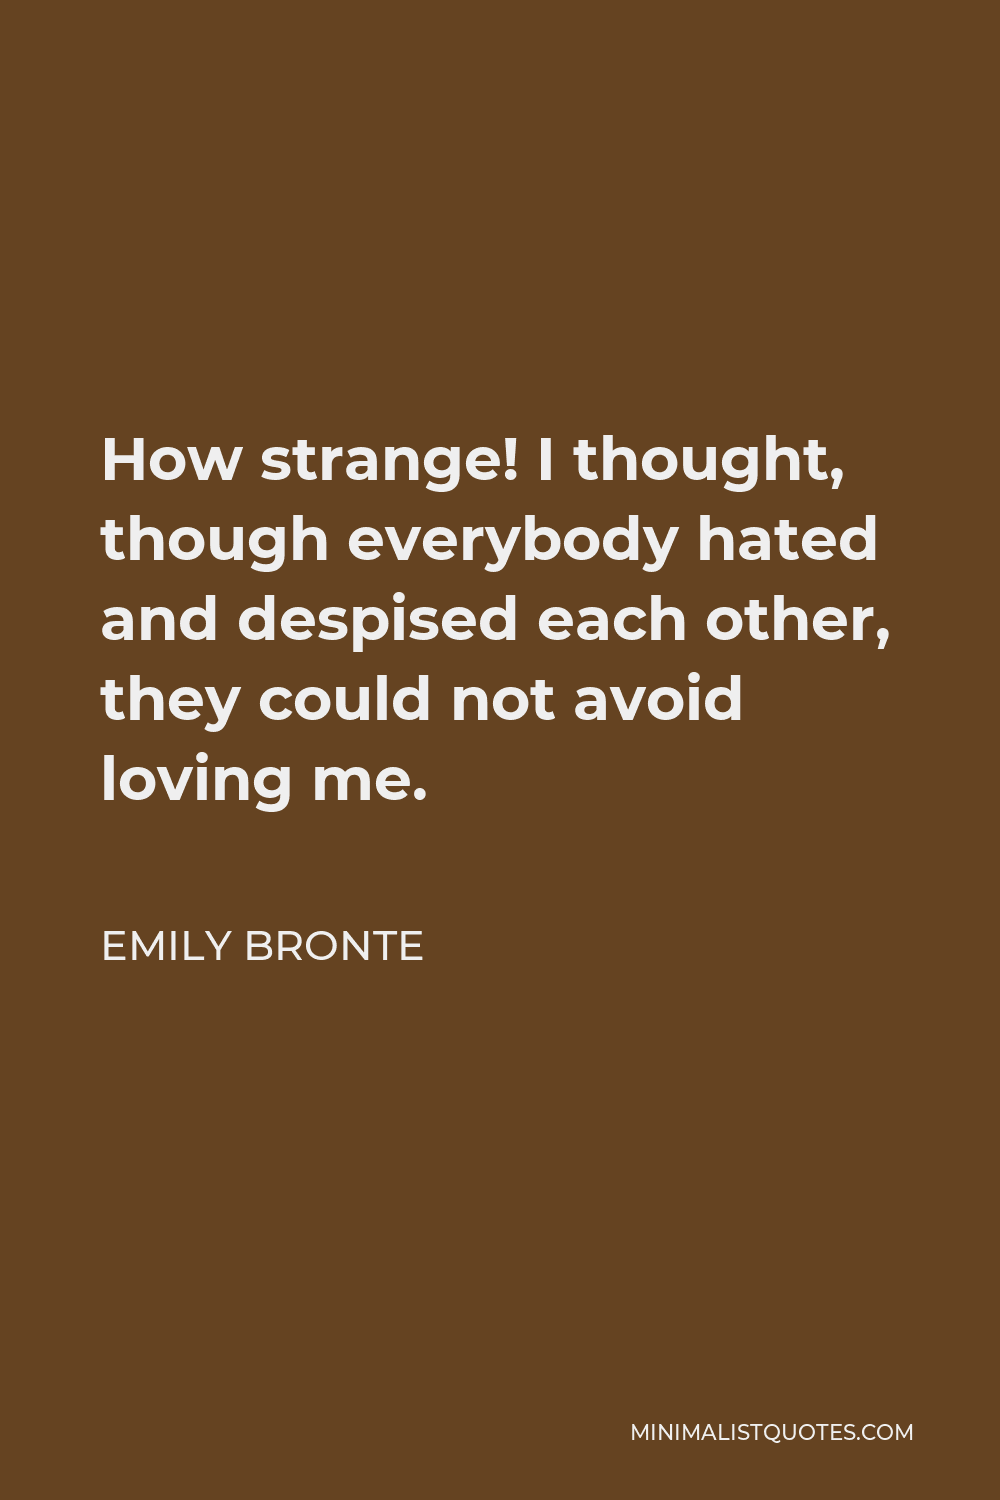 Emily Bronte Quote - How strange! I thought, though everybody hated and despised each other, they could not avoid loving me.